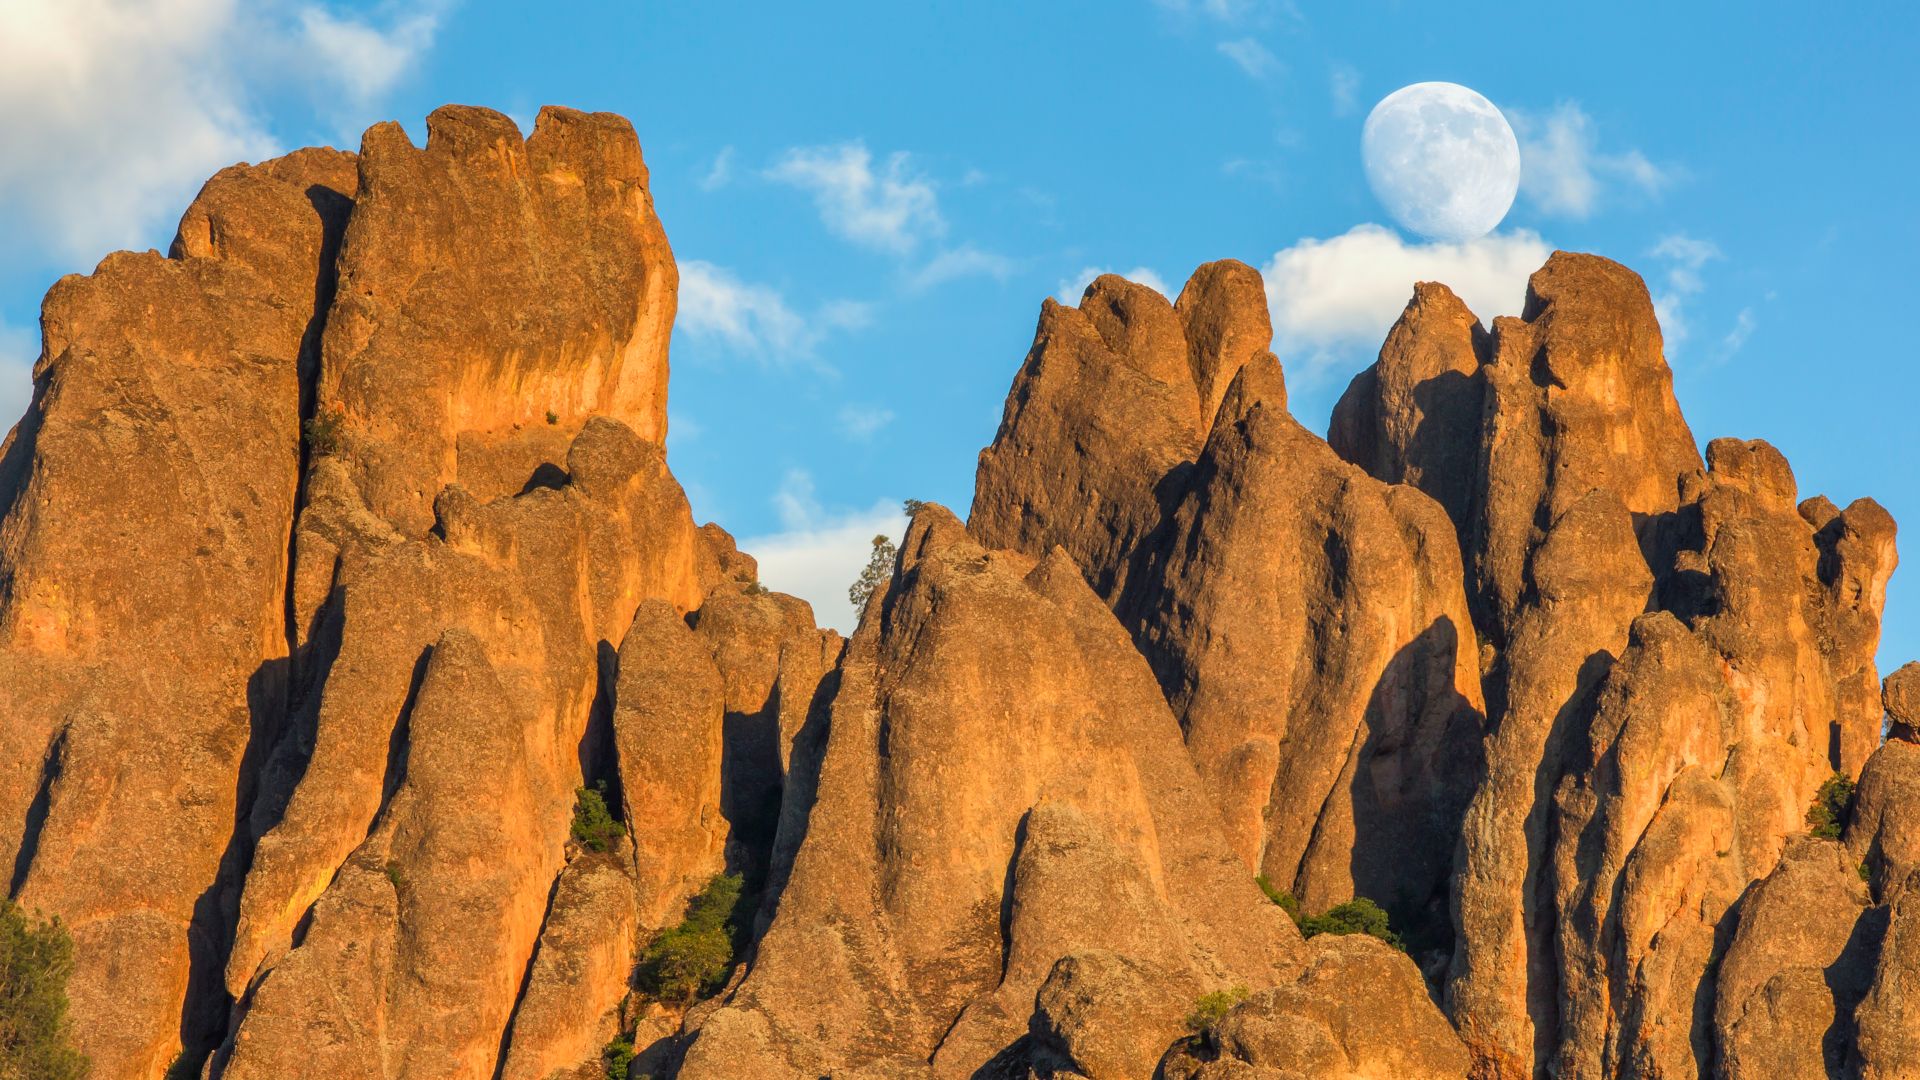 <p>                     This mountainous National Park in Central California is popular with rock climbers who are drawn to the massive rock monoliths that are leftovers from an extinct volcano. Hikers can also enjoy these rocks spires as well as breathtaking Talus Caves on over 80 miles of trails.                     </p>